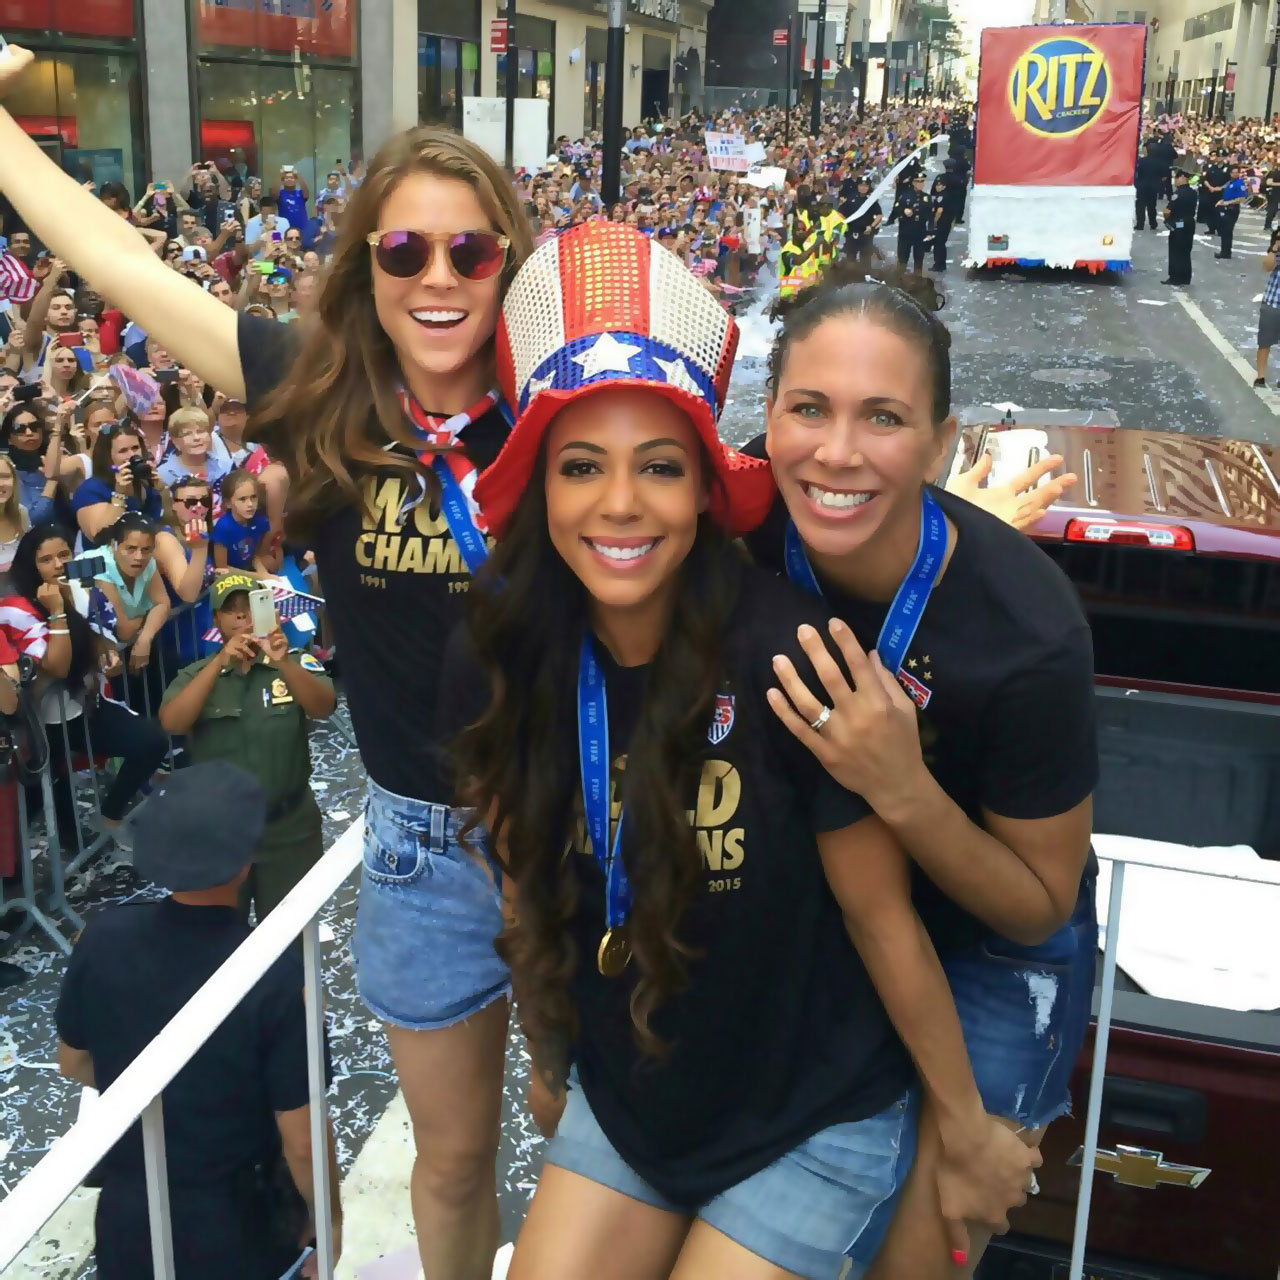 2015 Women's World Cup champion USWNT get their own NYC ticker tape parade